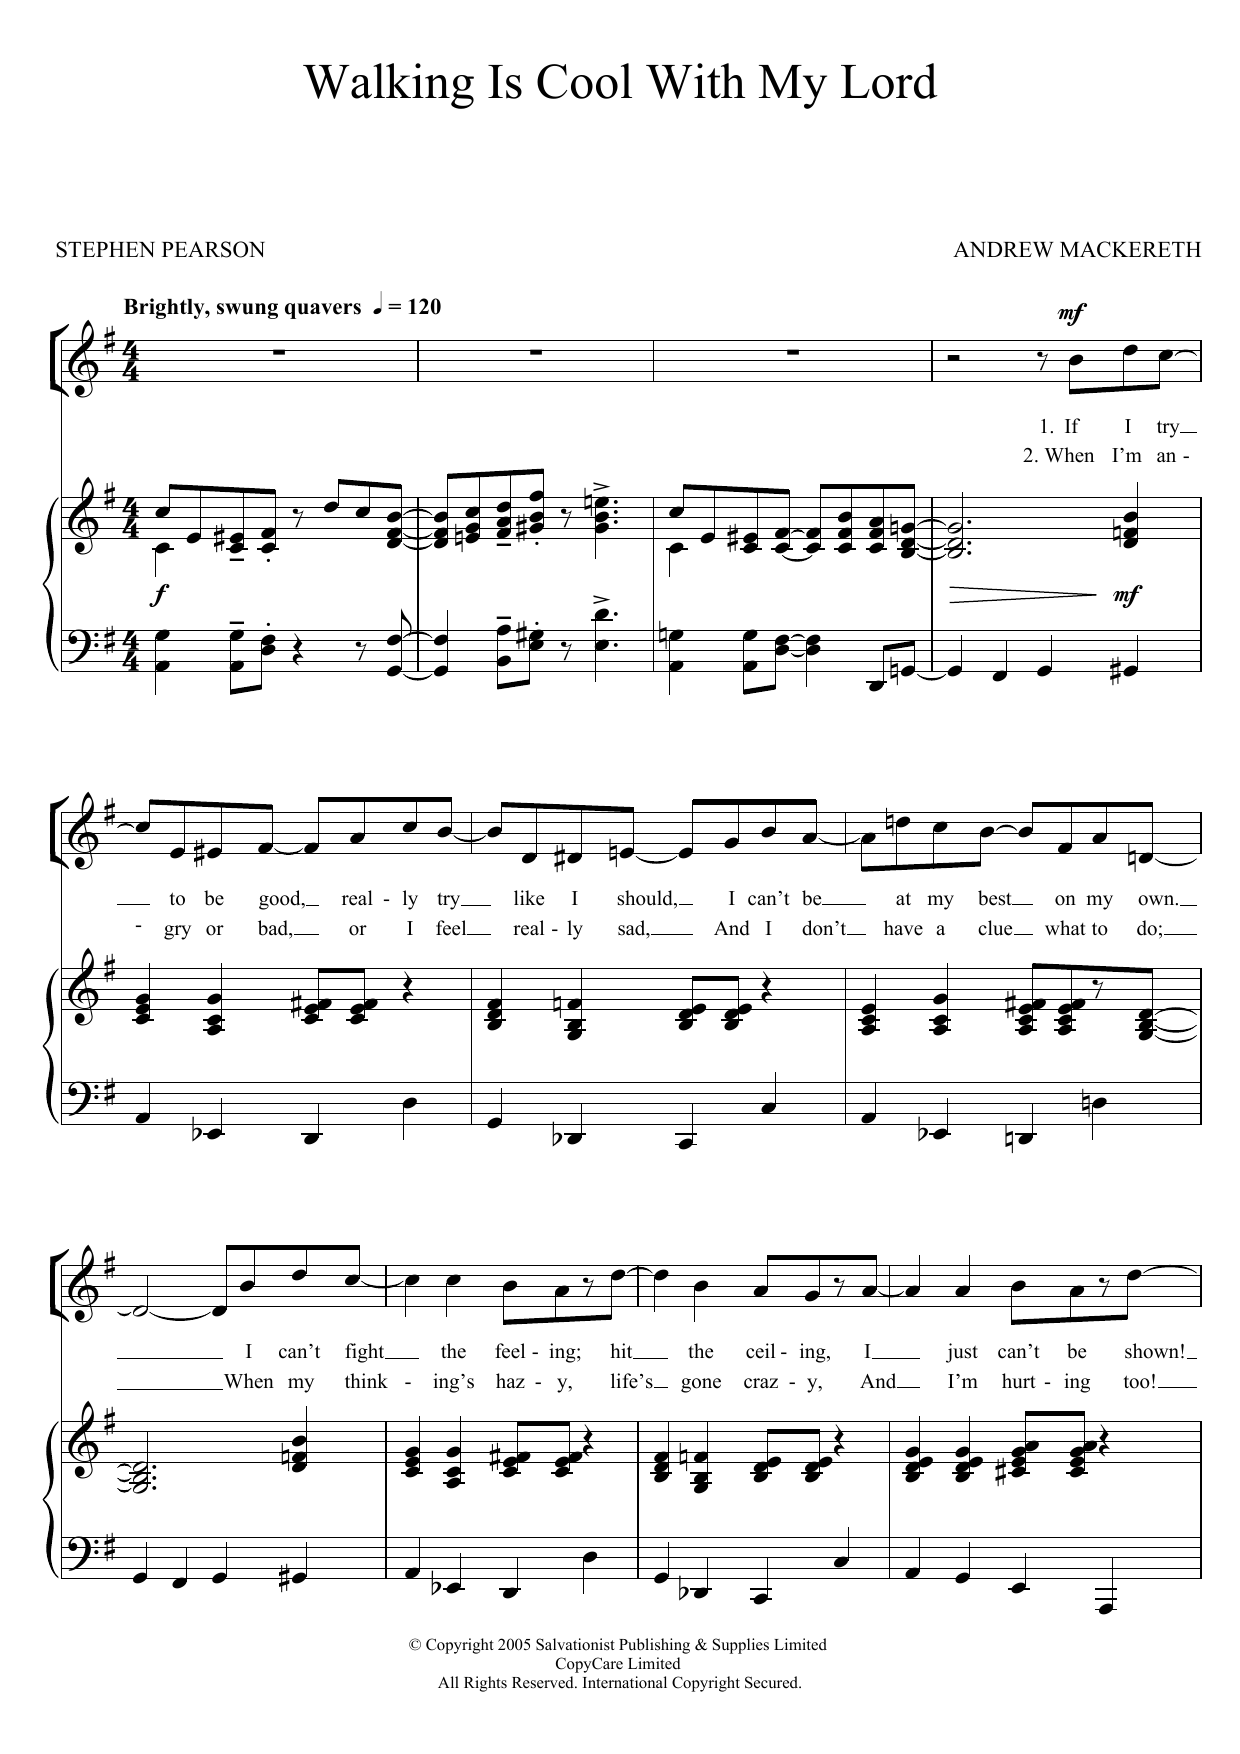 Download The Salvation Army Walking Is Cool With My Lord Sheet Music